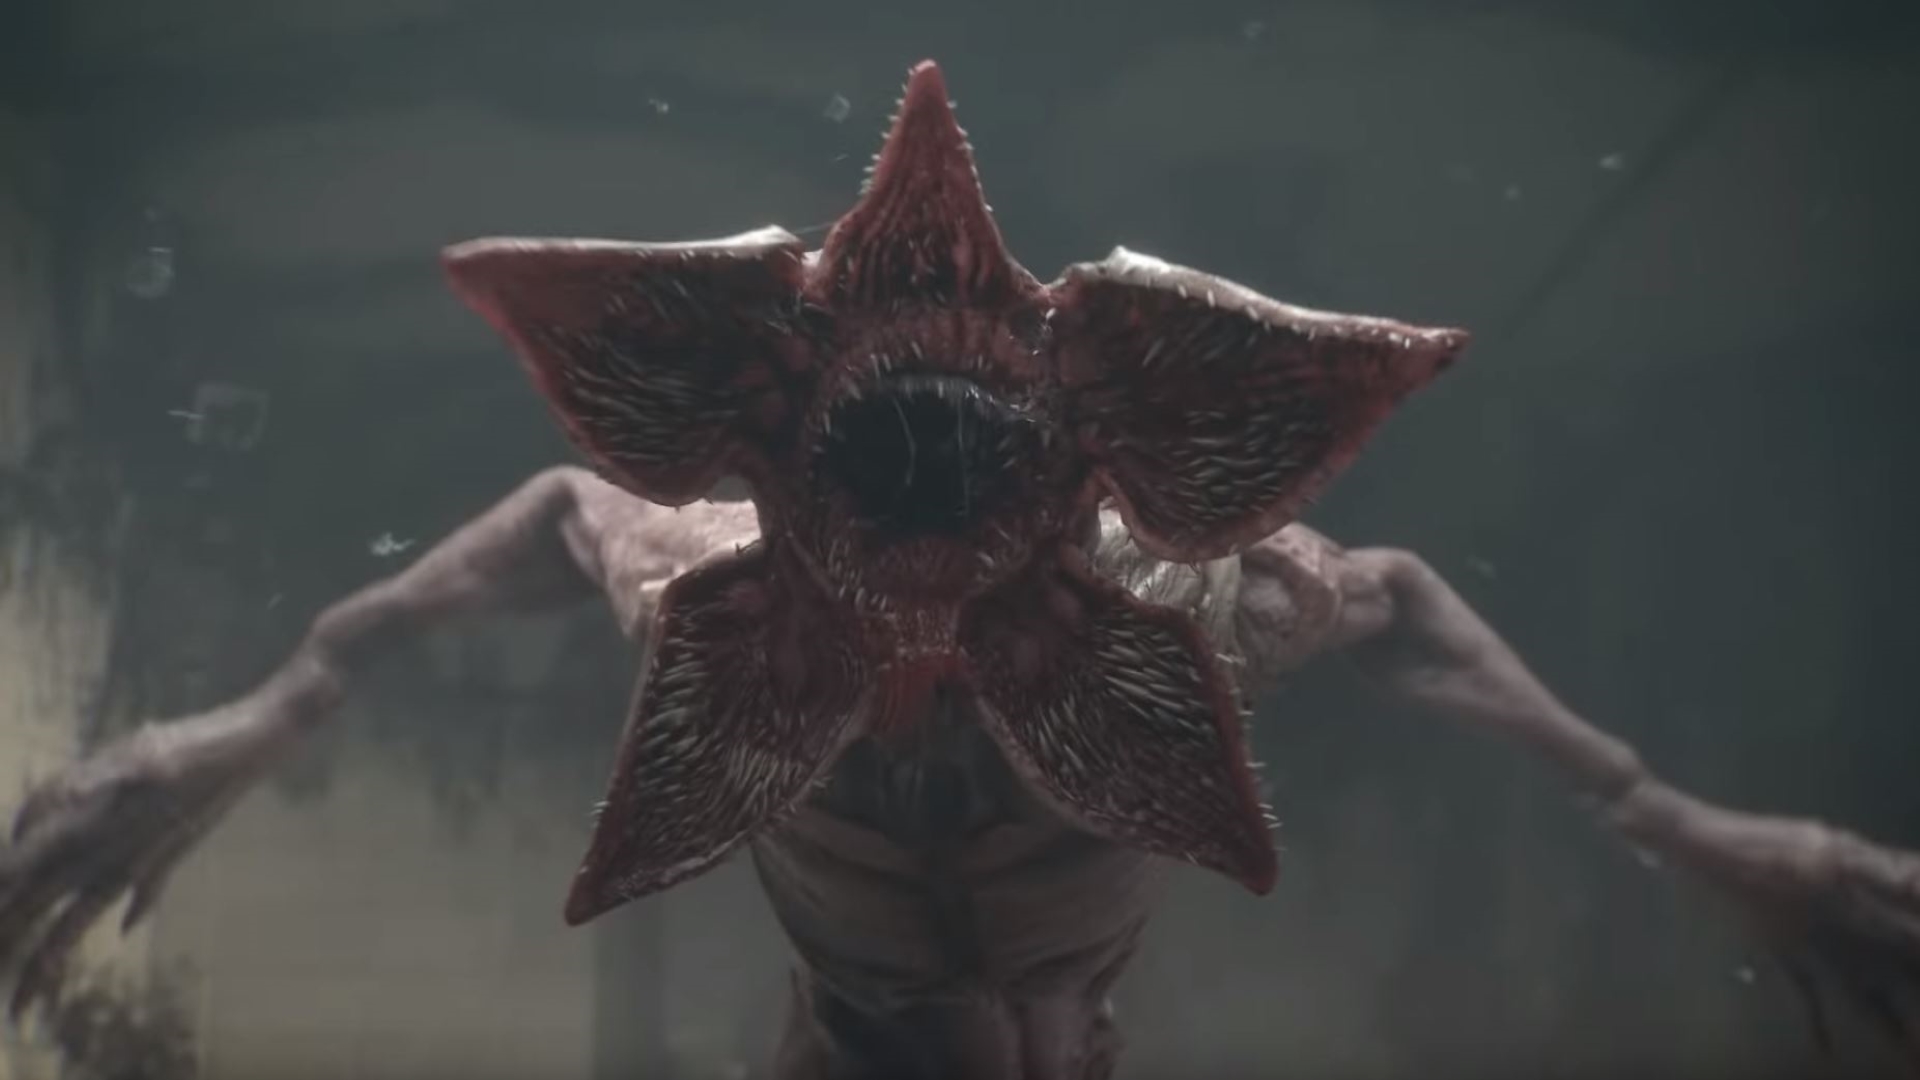 Stranger Things’ Demogorgon arrives in Dead by Daylight next month